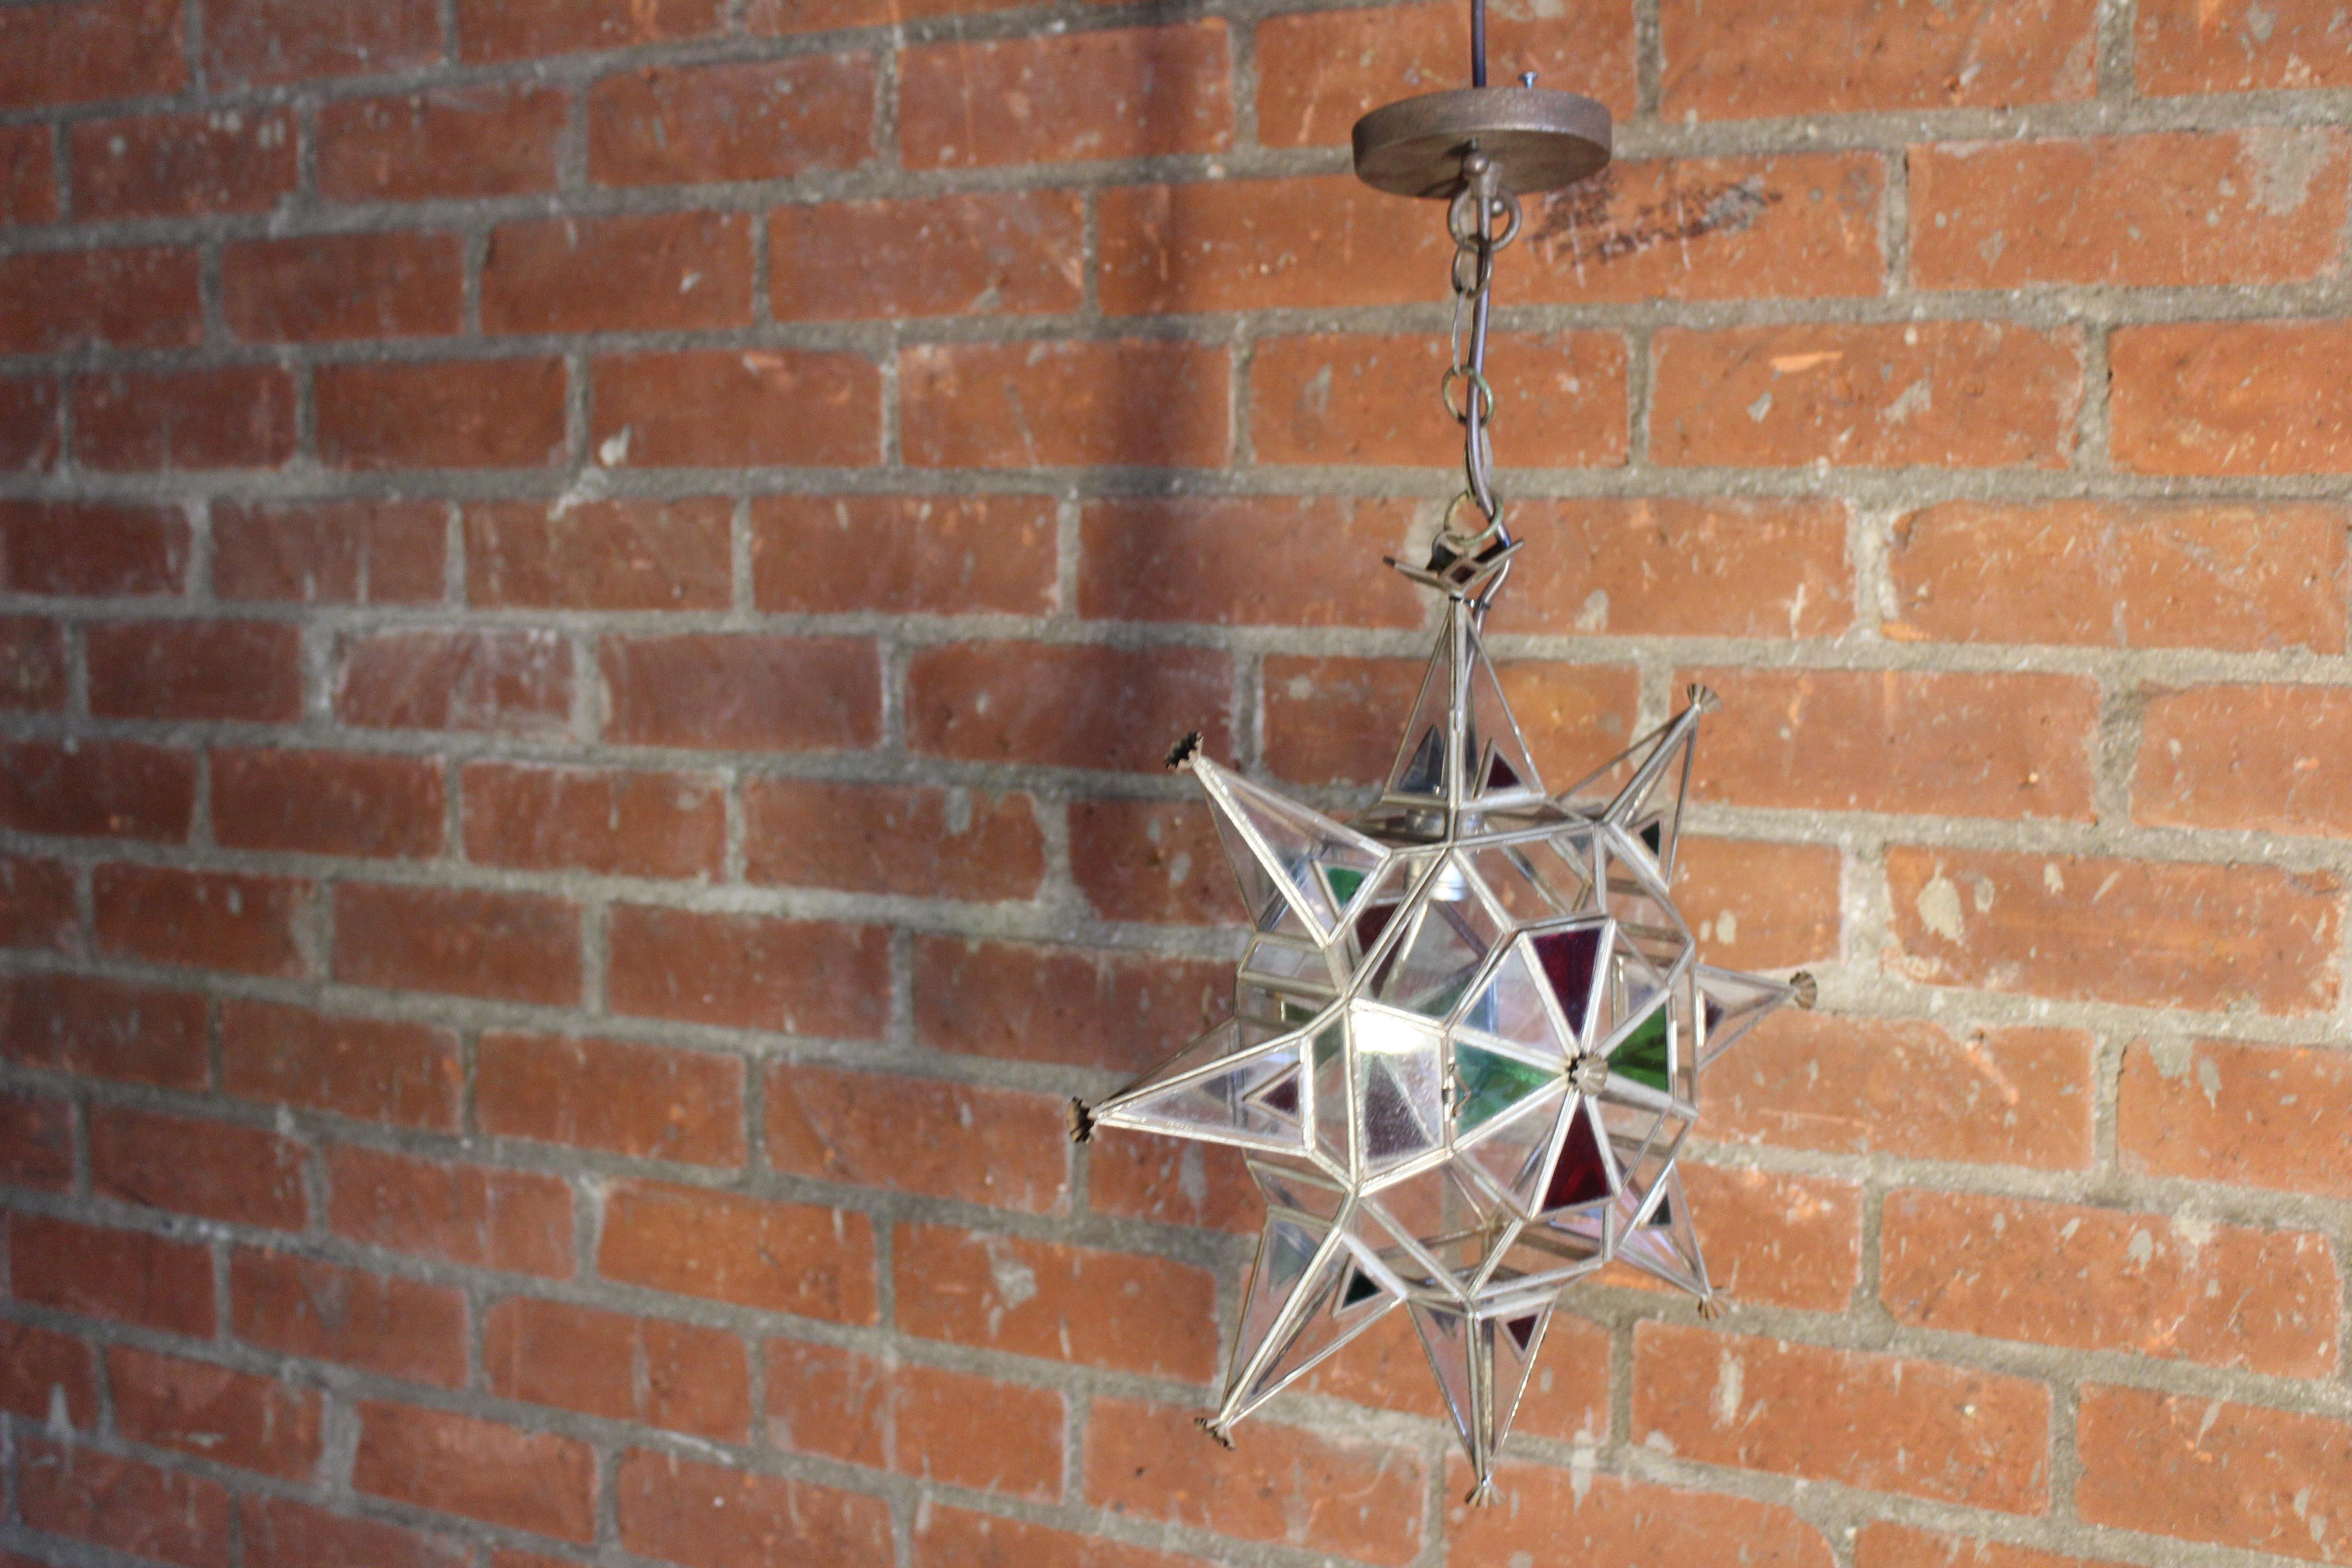 Pair of vintage Moorish style leaded glass star pendant lights. Newly rewired, each pendant uses one standard light bulb. Sold as a pair.
They hang 26